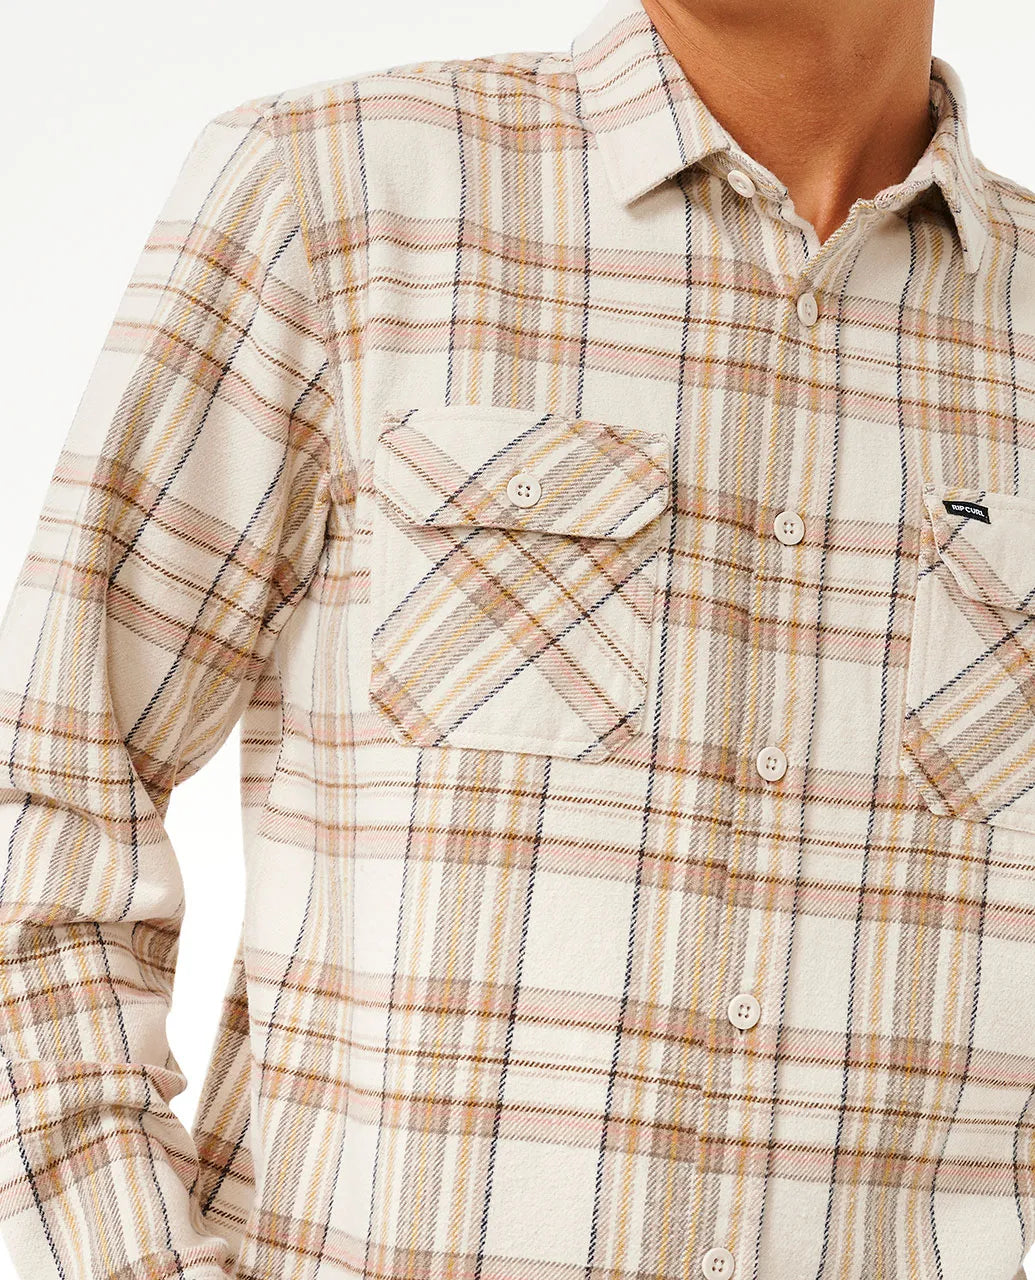 Rip Curl Griffin Flannel Shirt